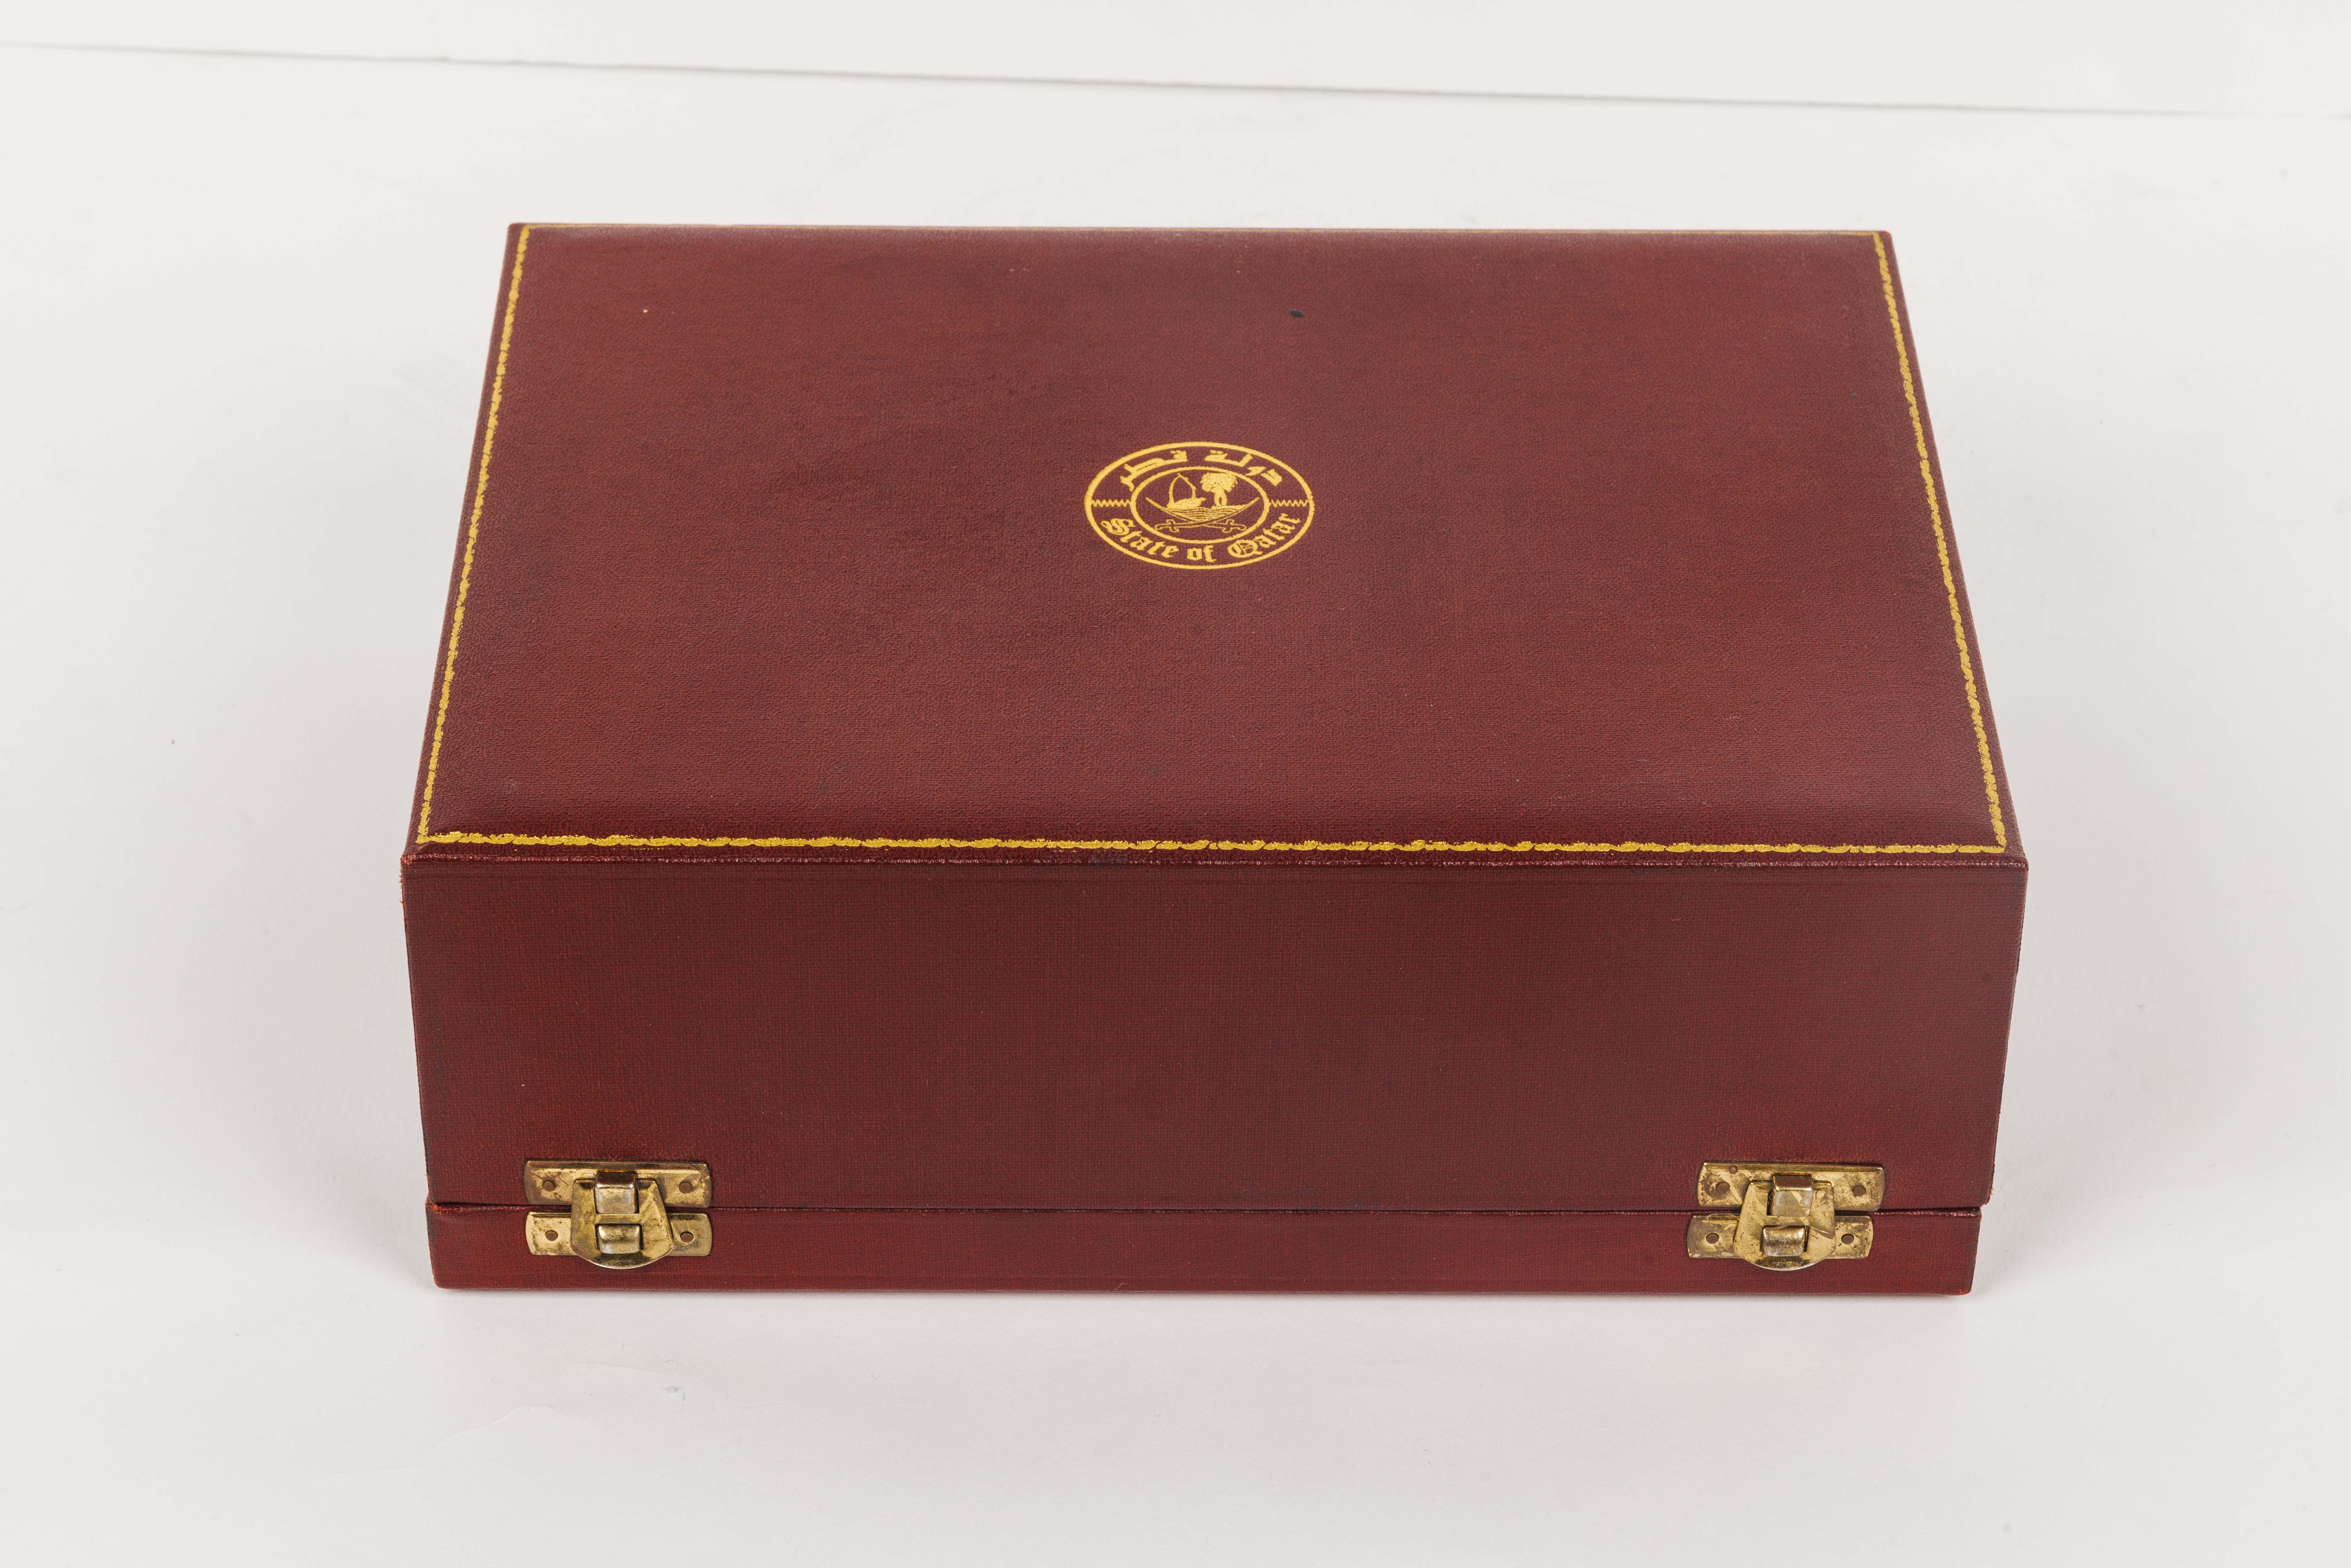 State of Qatar and Grant Macdonald, A Rare Silver Humidor Box in original fitted box depicting the map and flags of The State of Qatar and the Royal seal of the State.

Silverware is a traditional gift in many cultures and Qatar is known for its